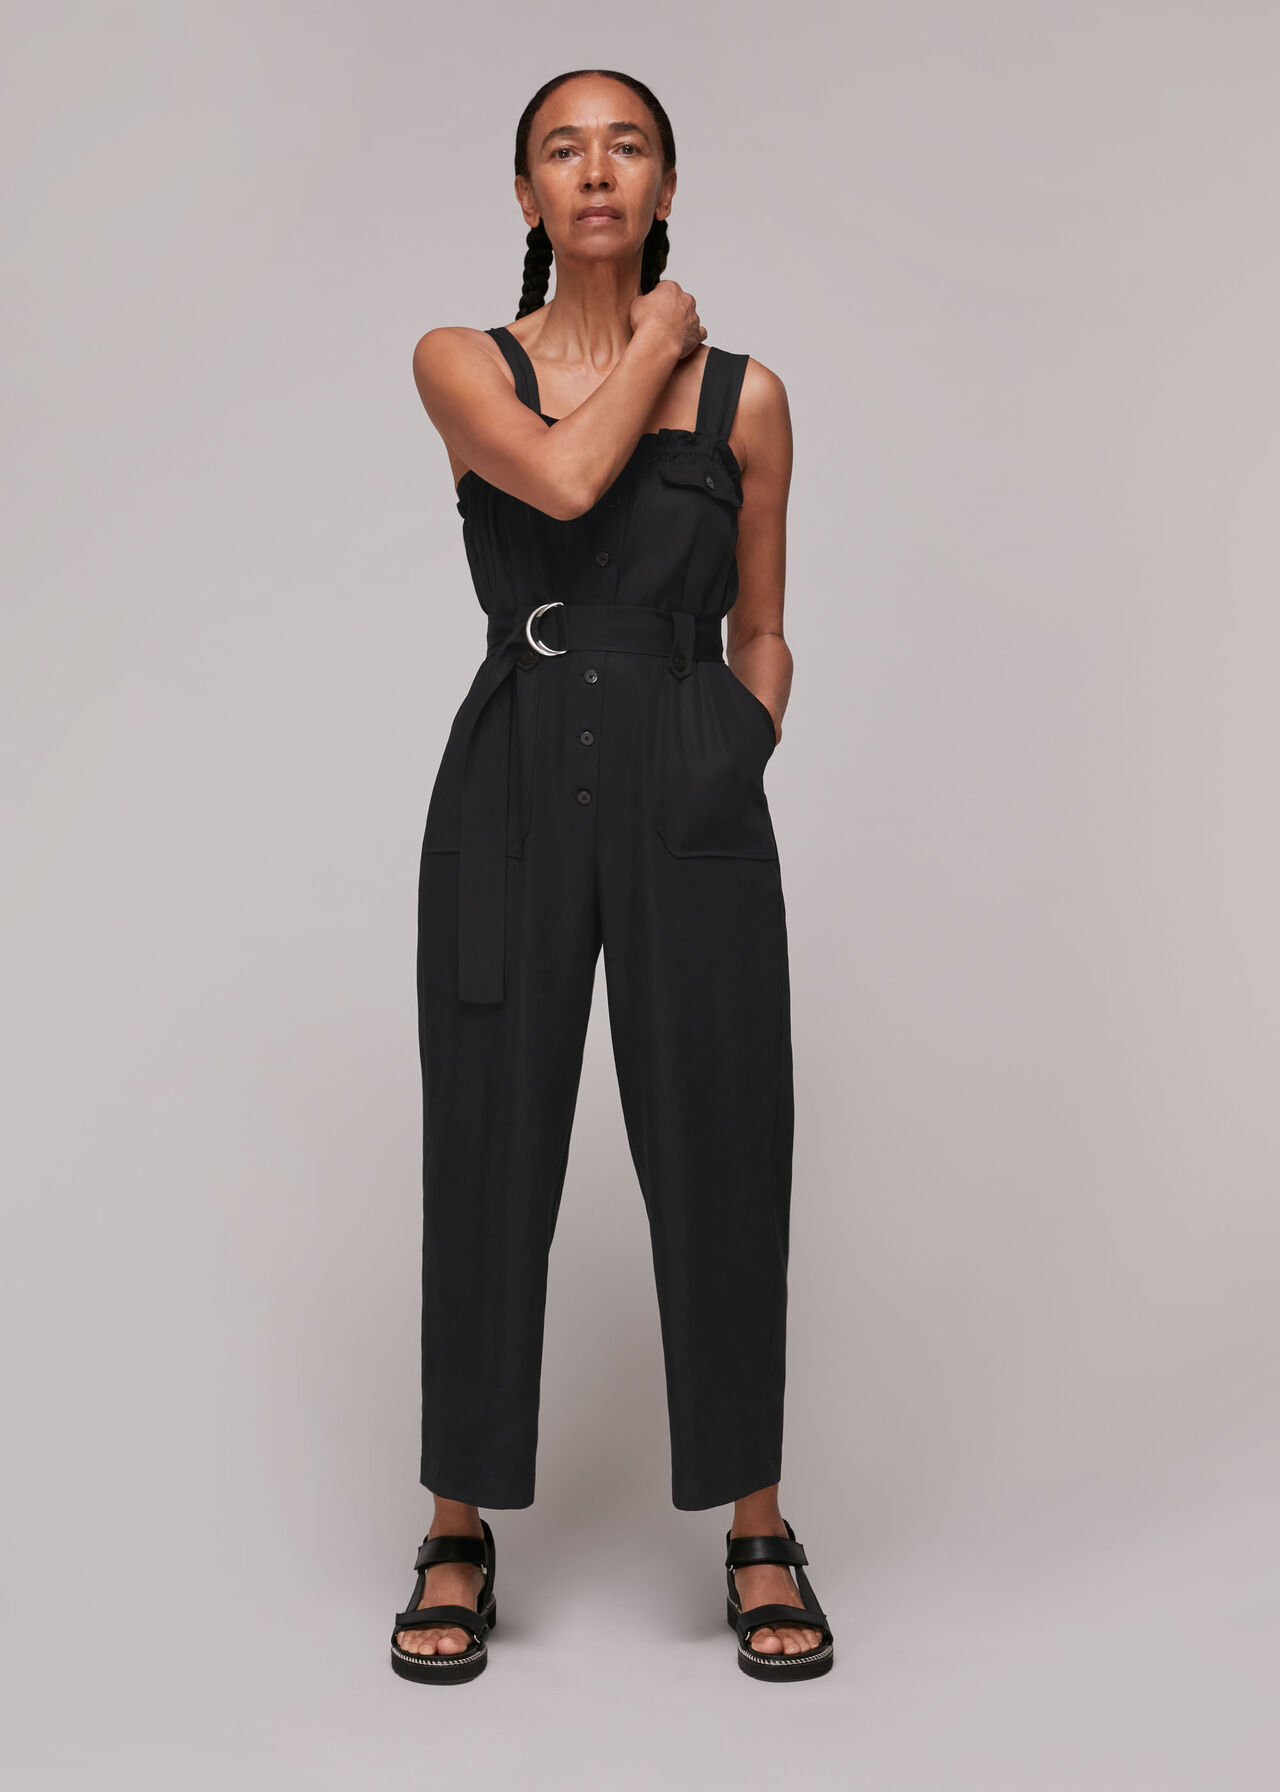 Black Frill Utility Belted Jumpsuit | WHISTLES |